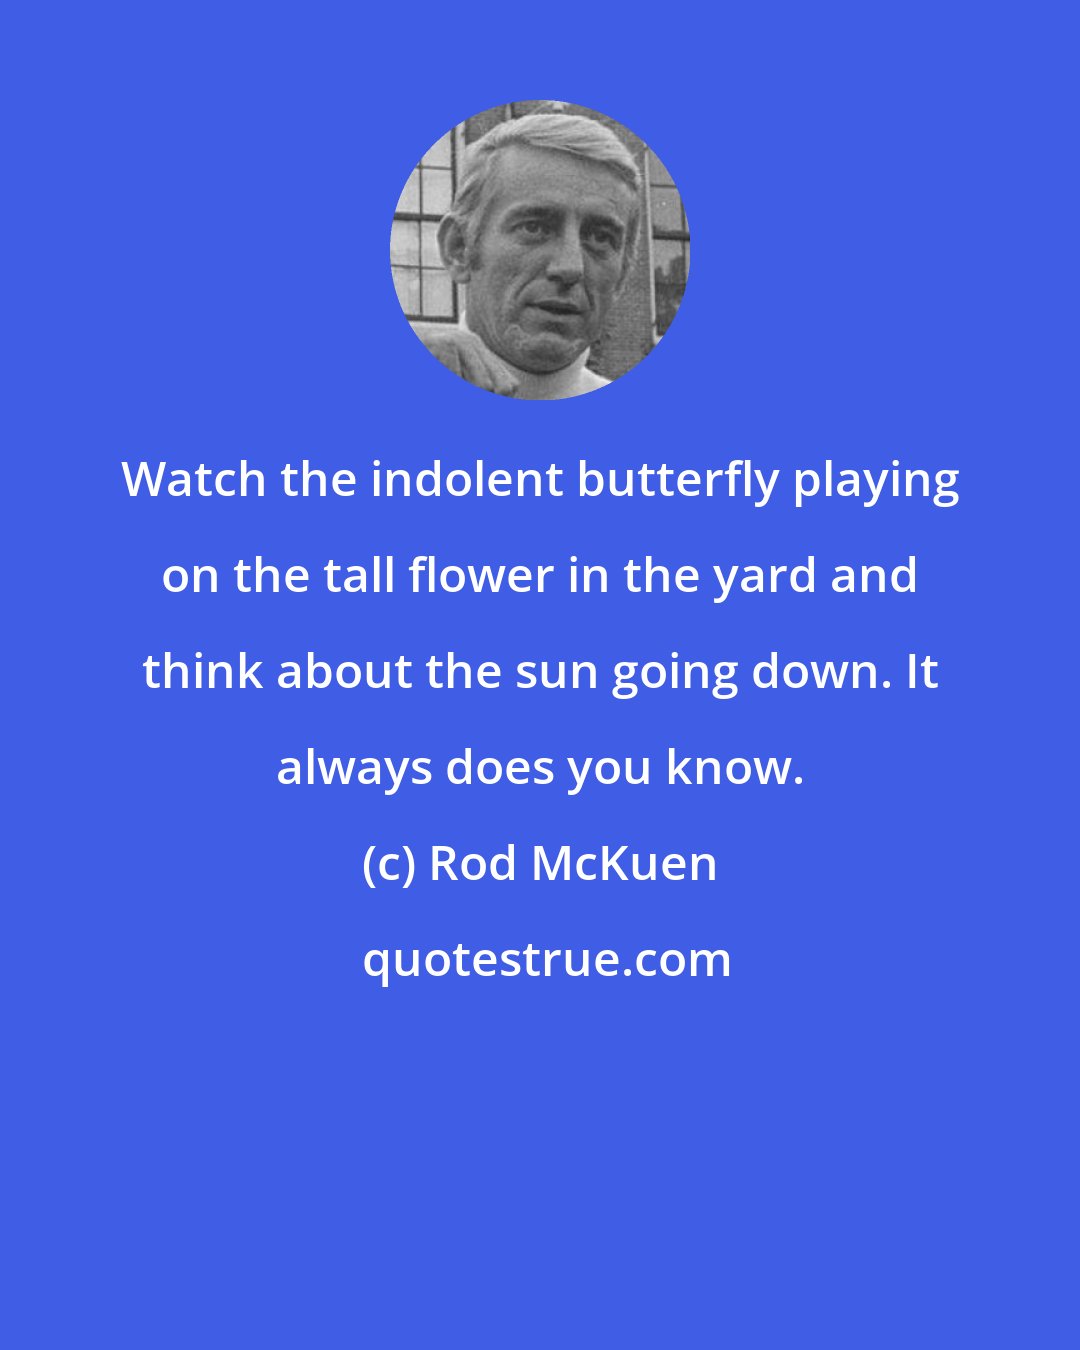 Rod McKuen: Watch the indolent butterfly playing on the tall flower in the yard and think about the sun going down. It always does you know.